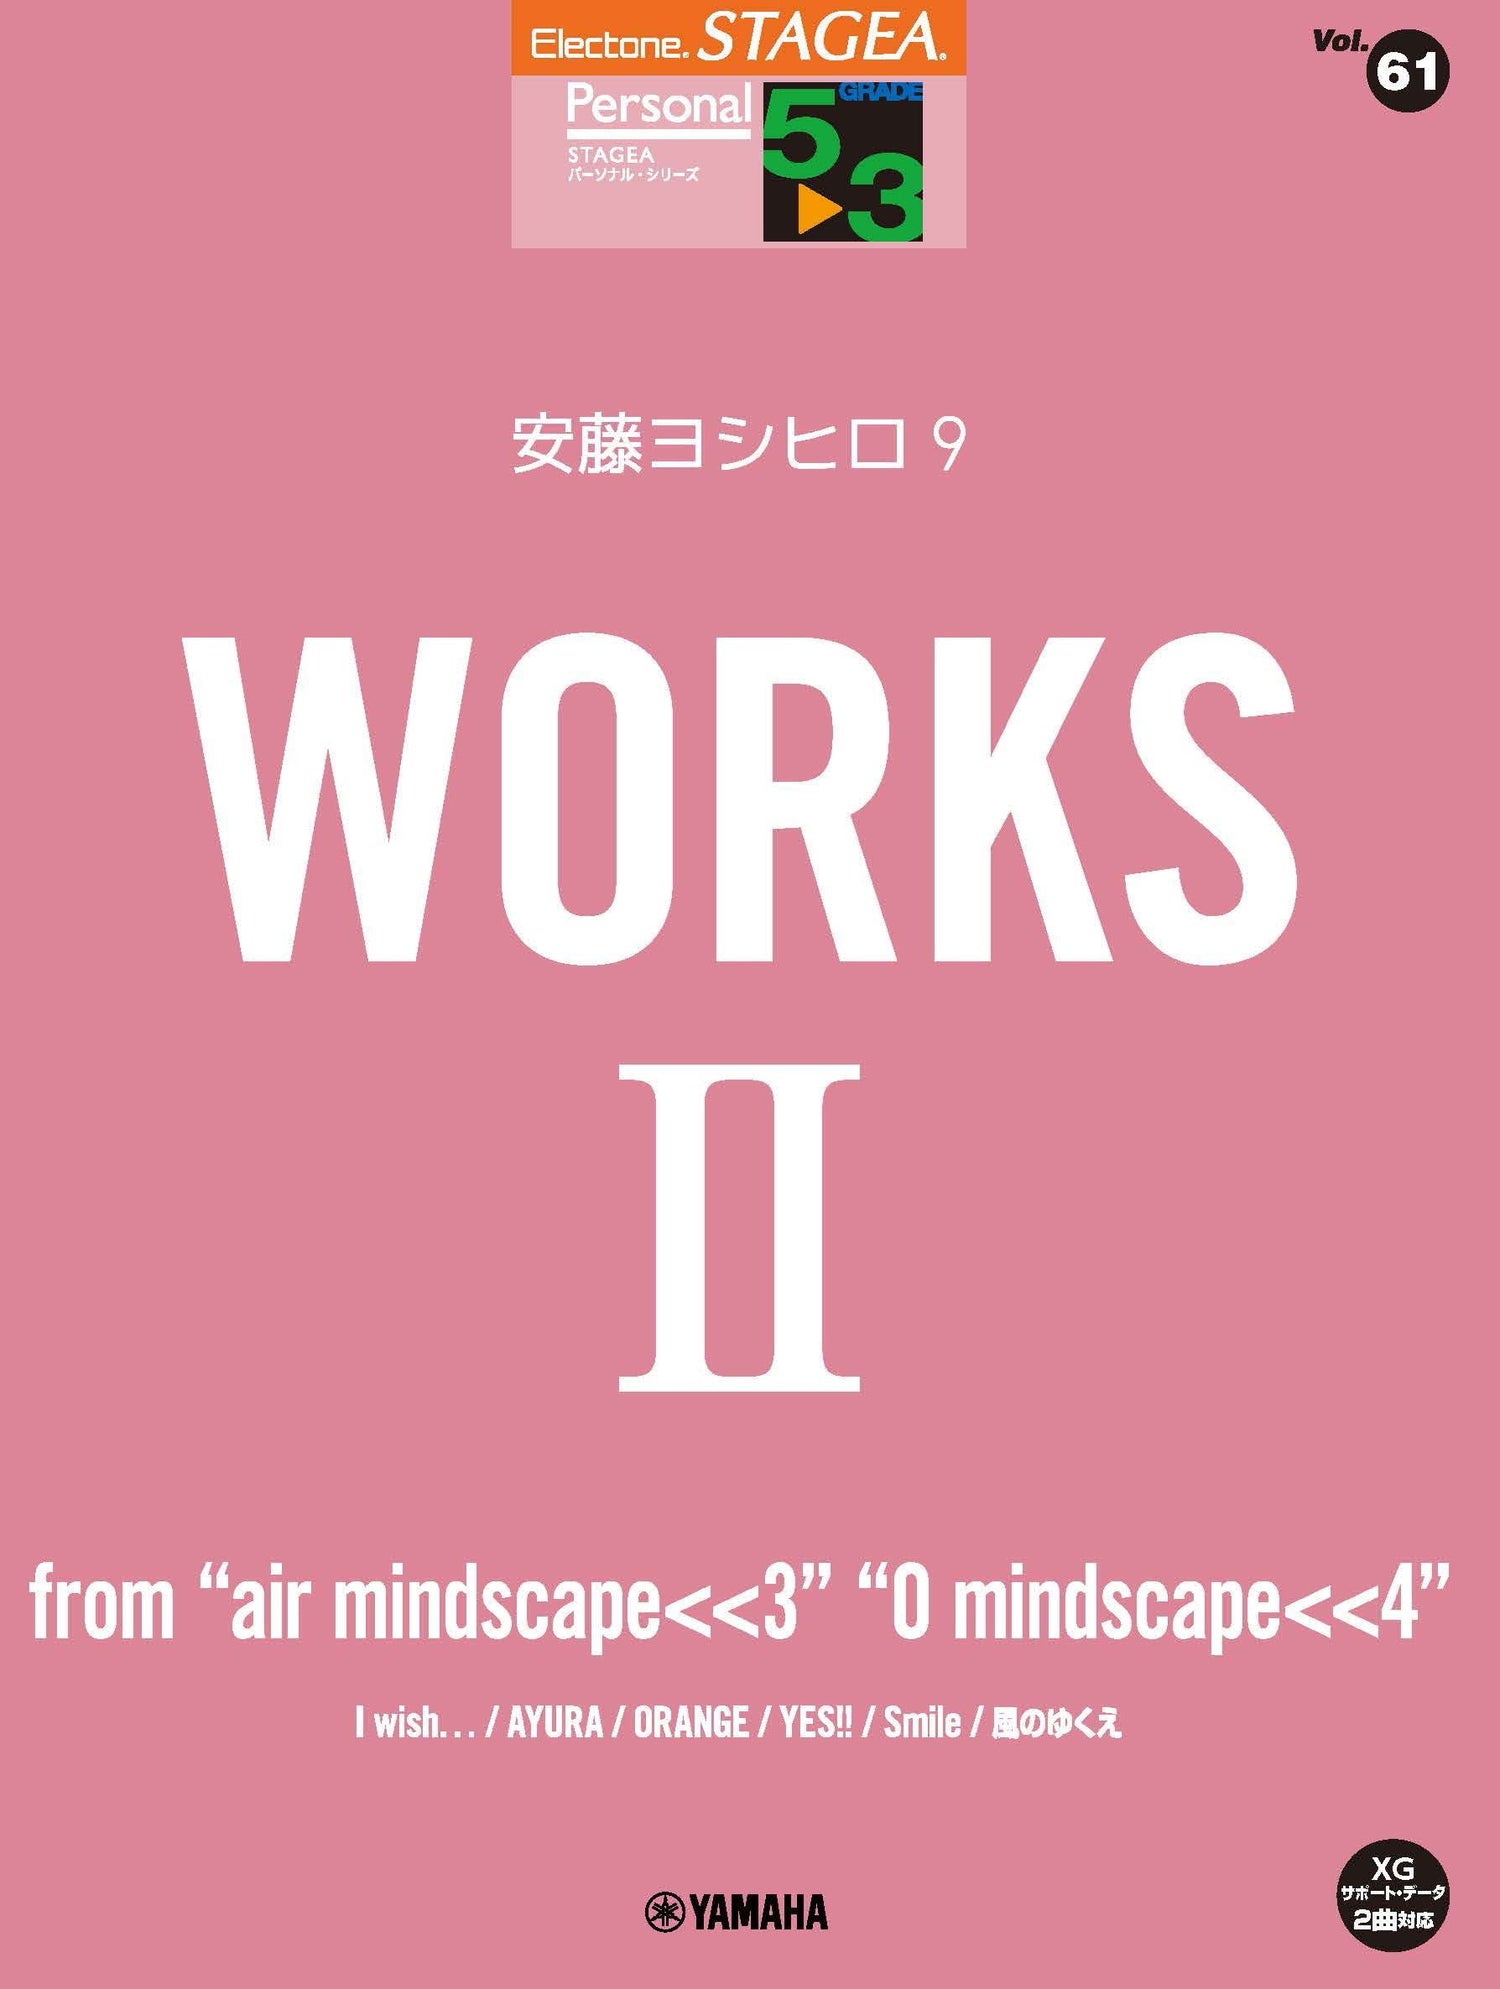 STAGEA パーソナル 5～3級 Vol.61 安藤ヨシヒロ9 『WORKS 2 ～from “air mindscape＜＜3““O  mindscape＜＜4”』 | ヤマハの楽譜通販サイト Sheet Music Store